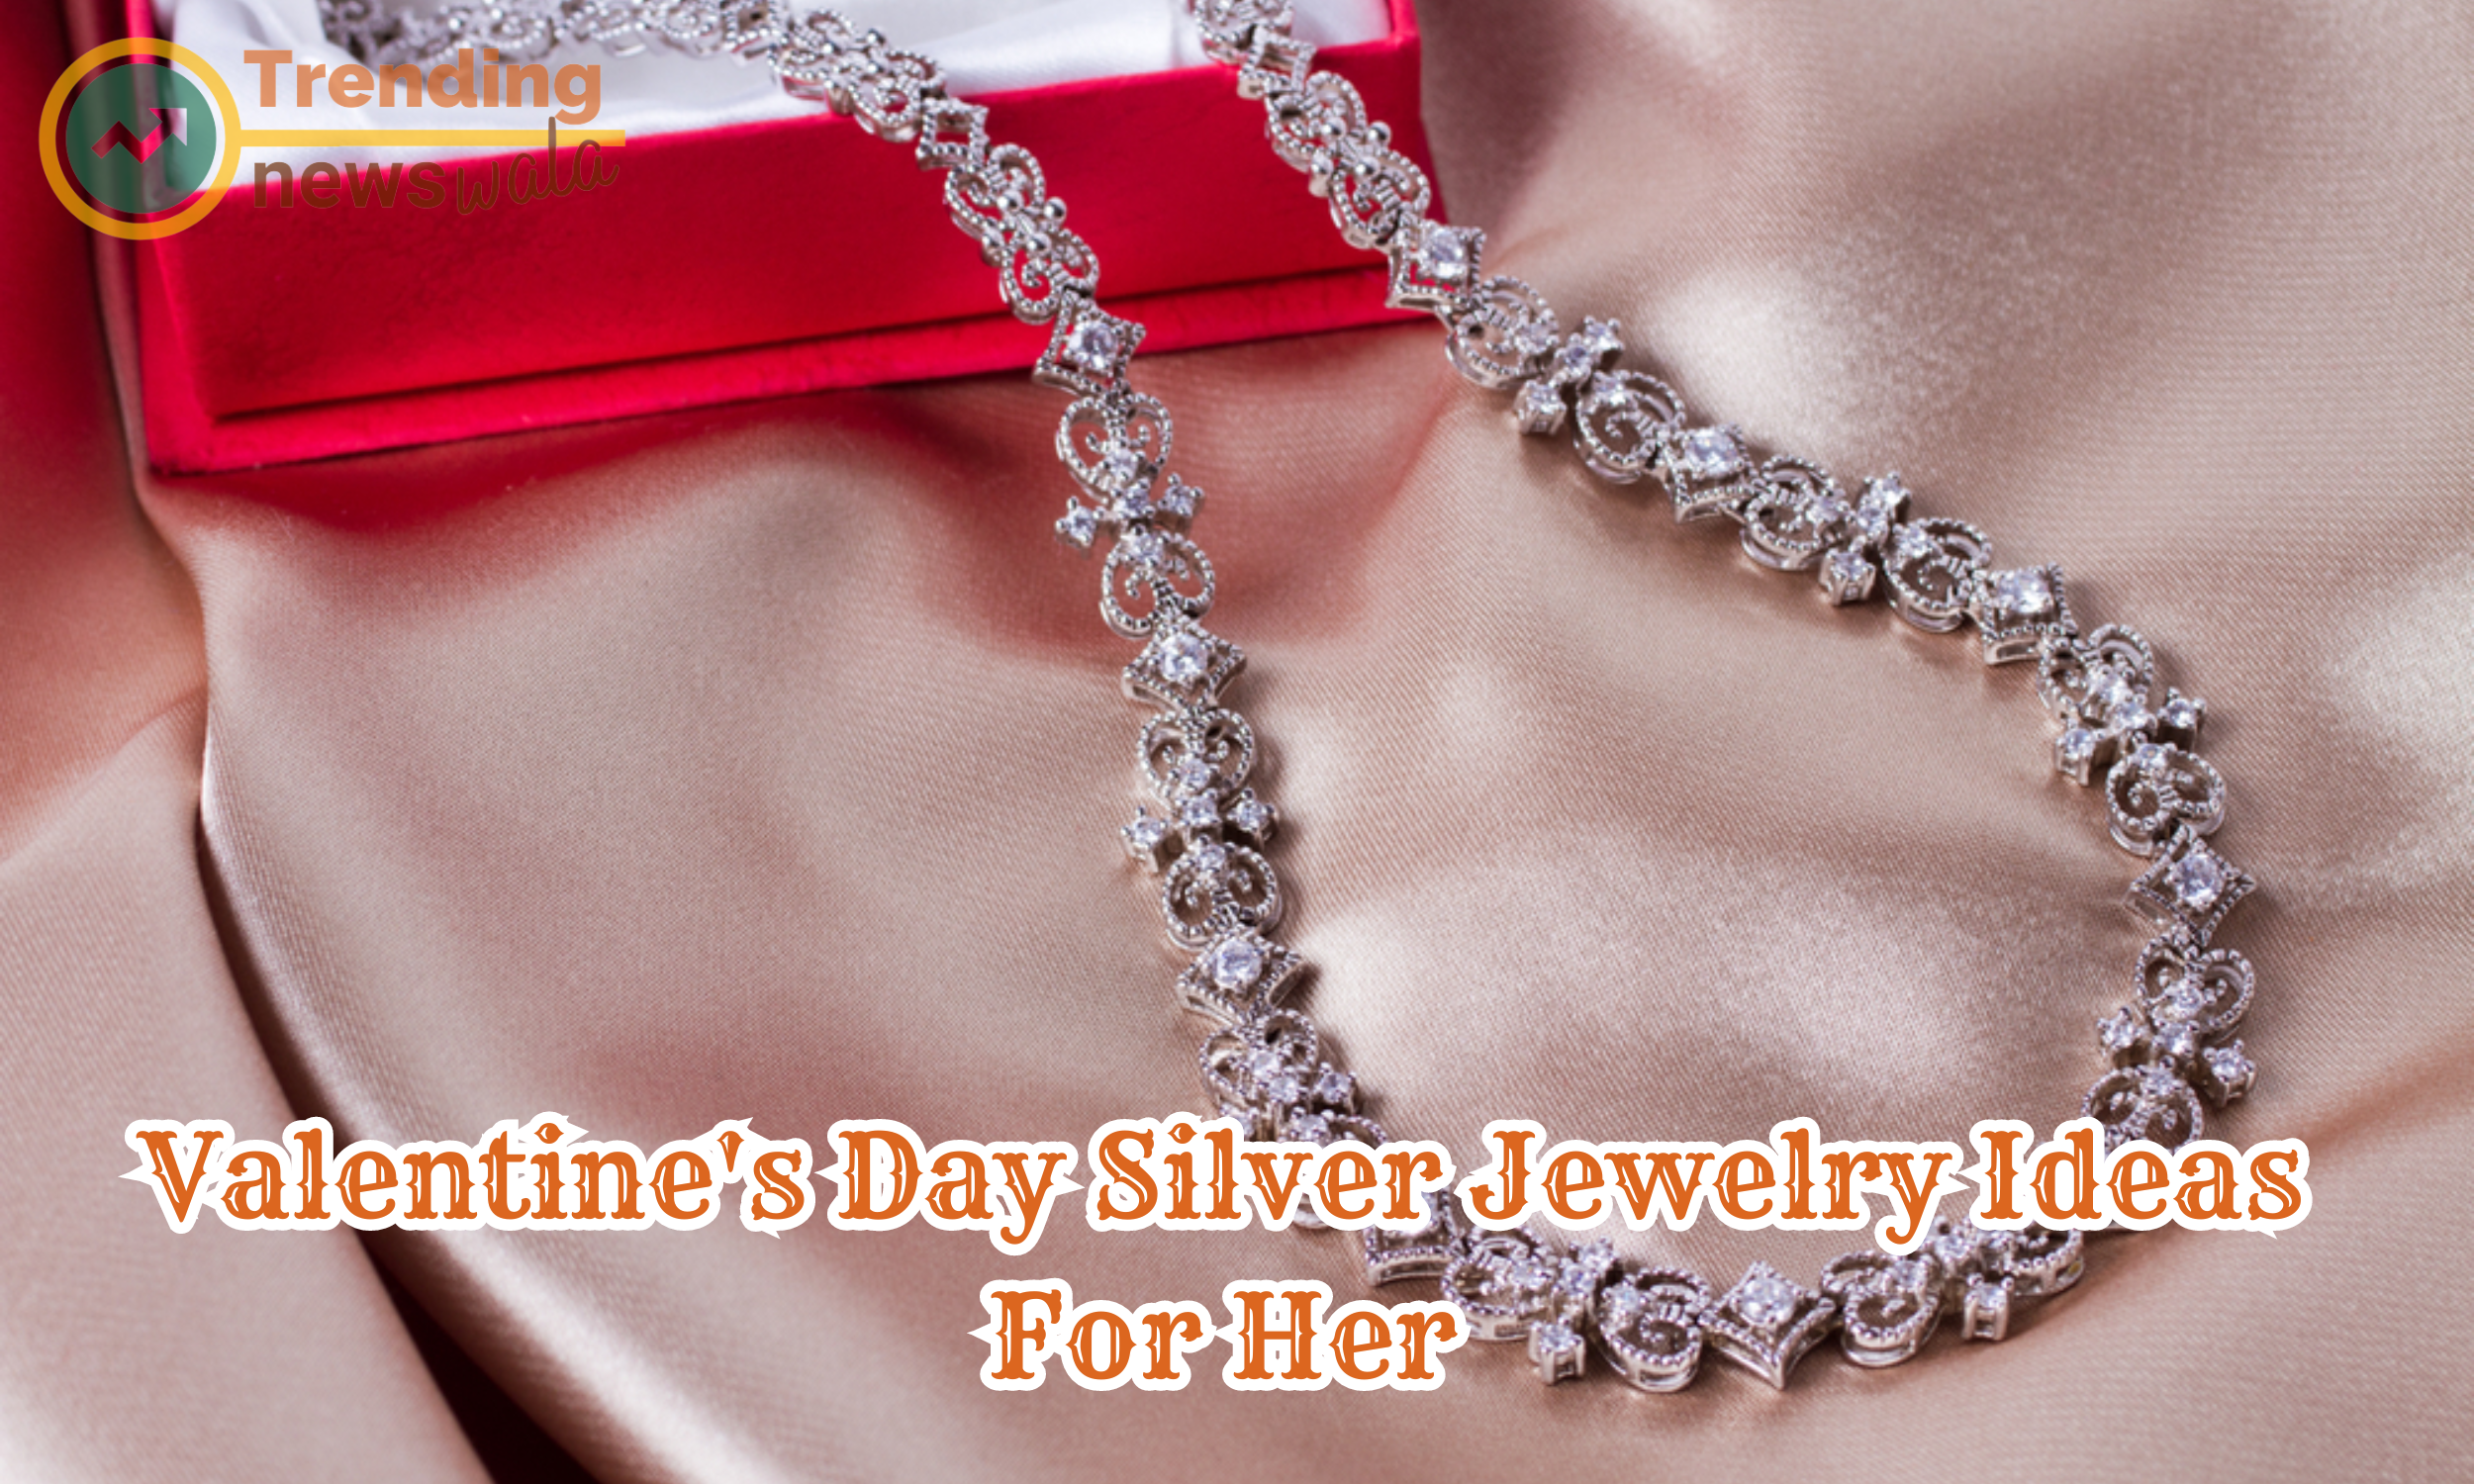 Valentine's Day silver jewelry for her offers a wide range of romantic